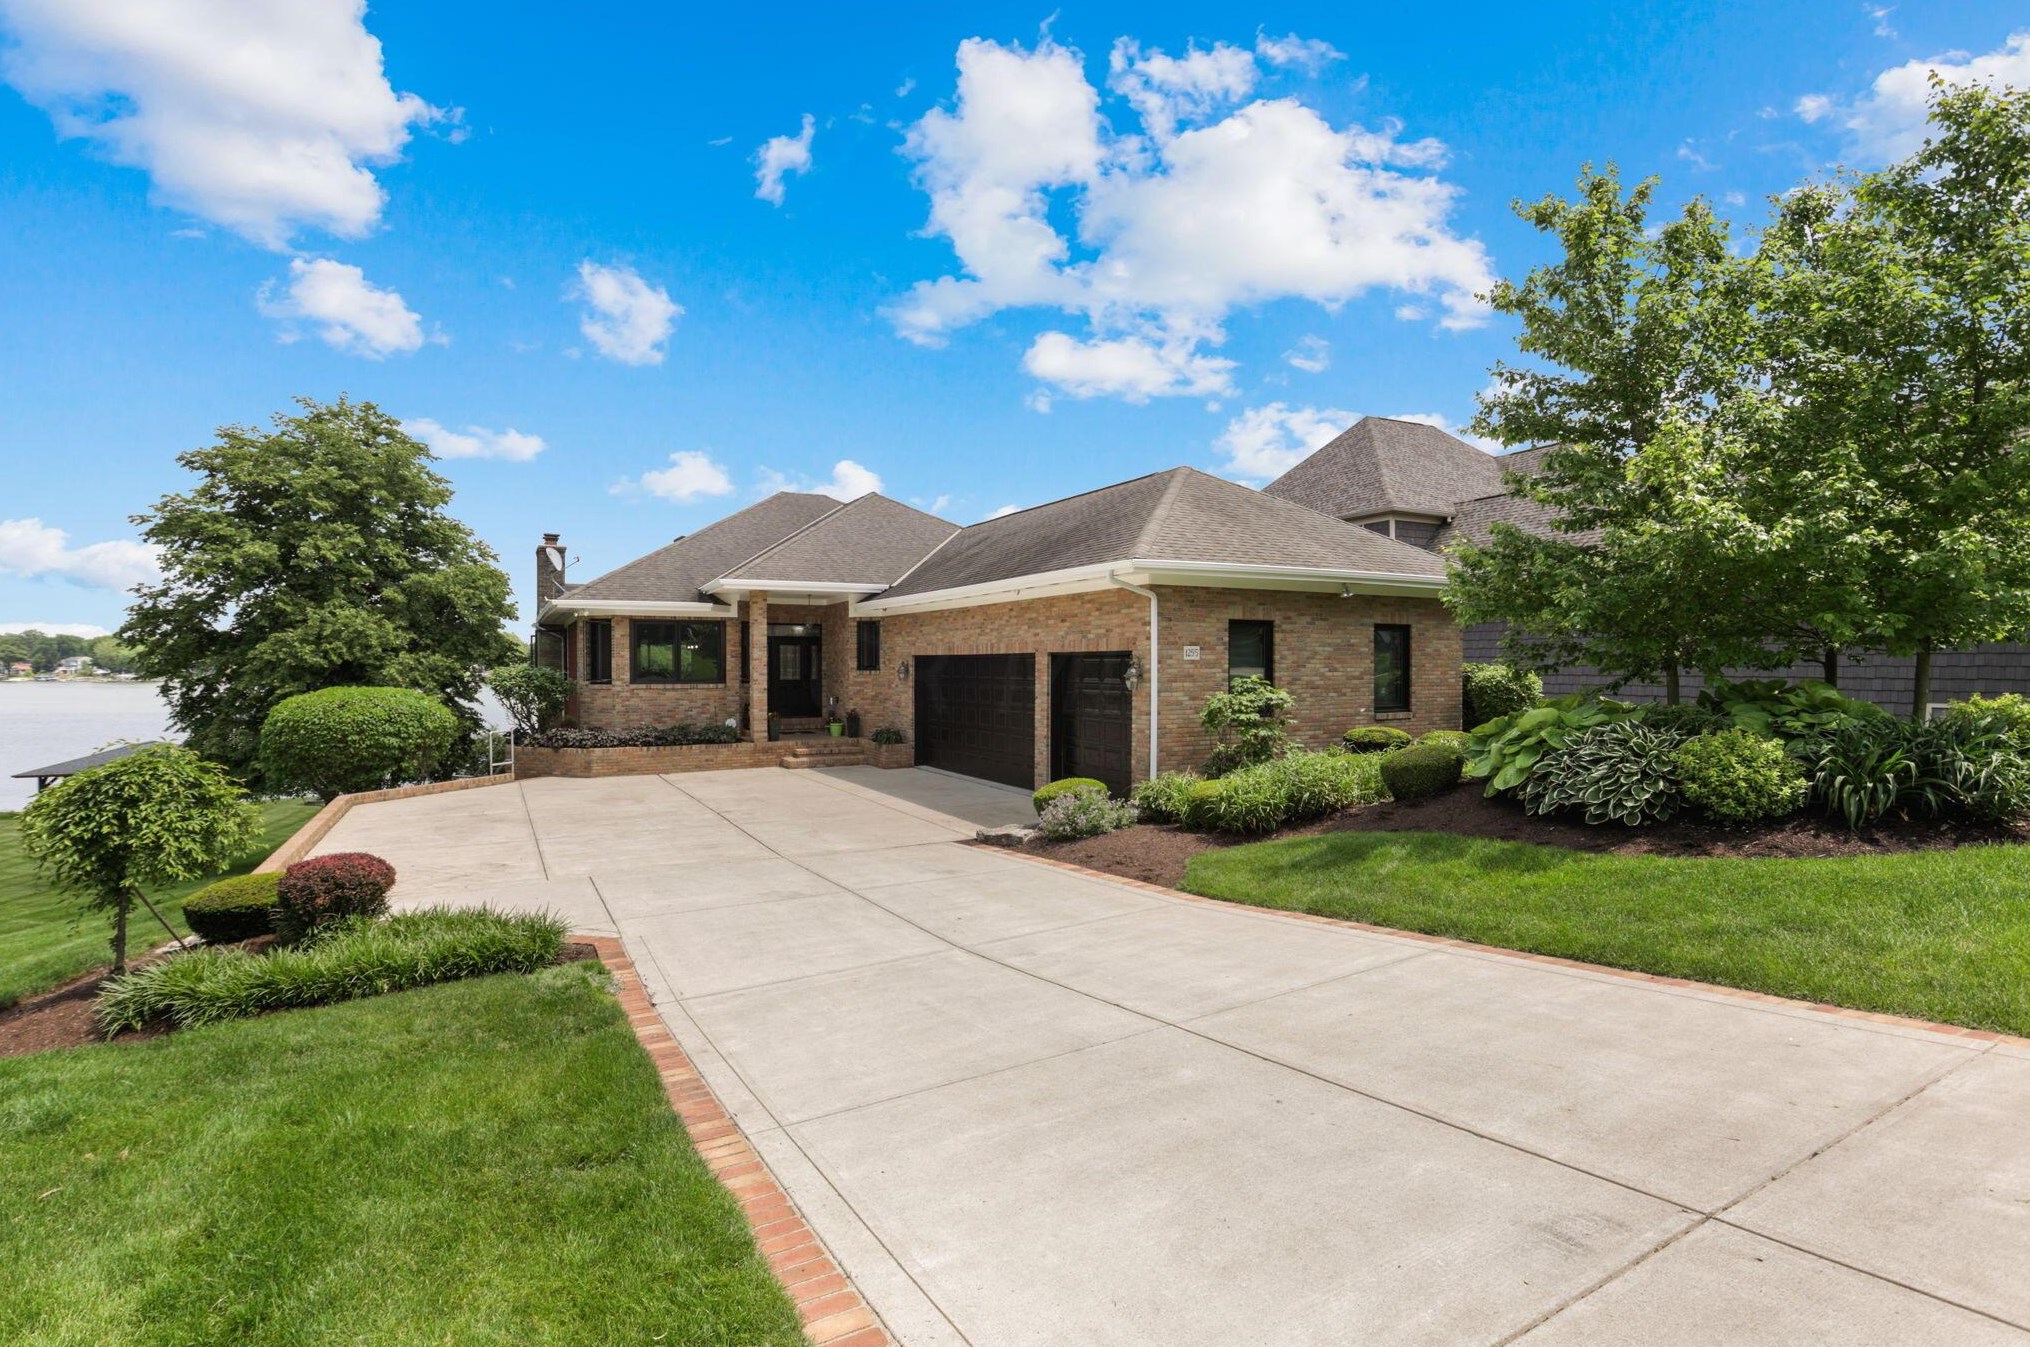 1255 Chickasaw Dr, London, OH 43140